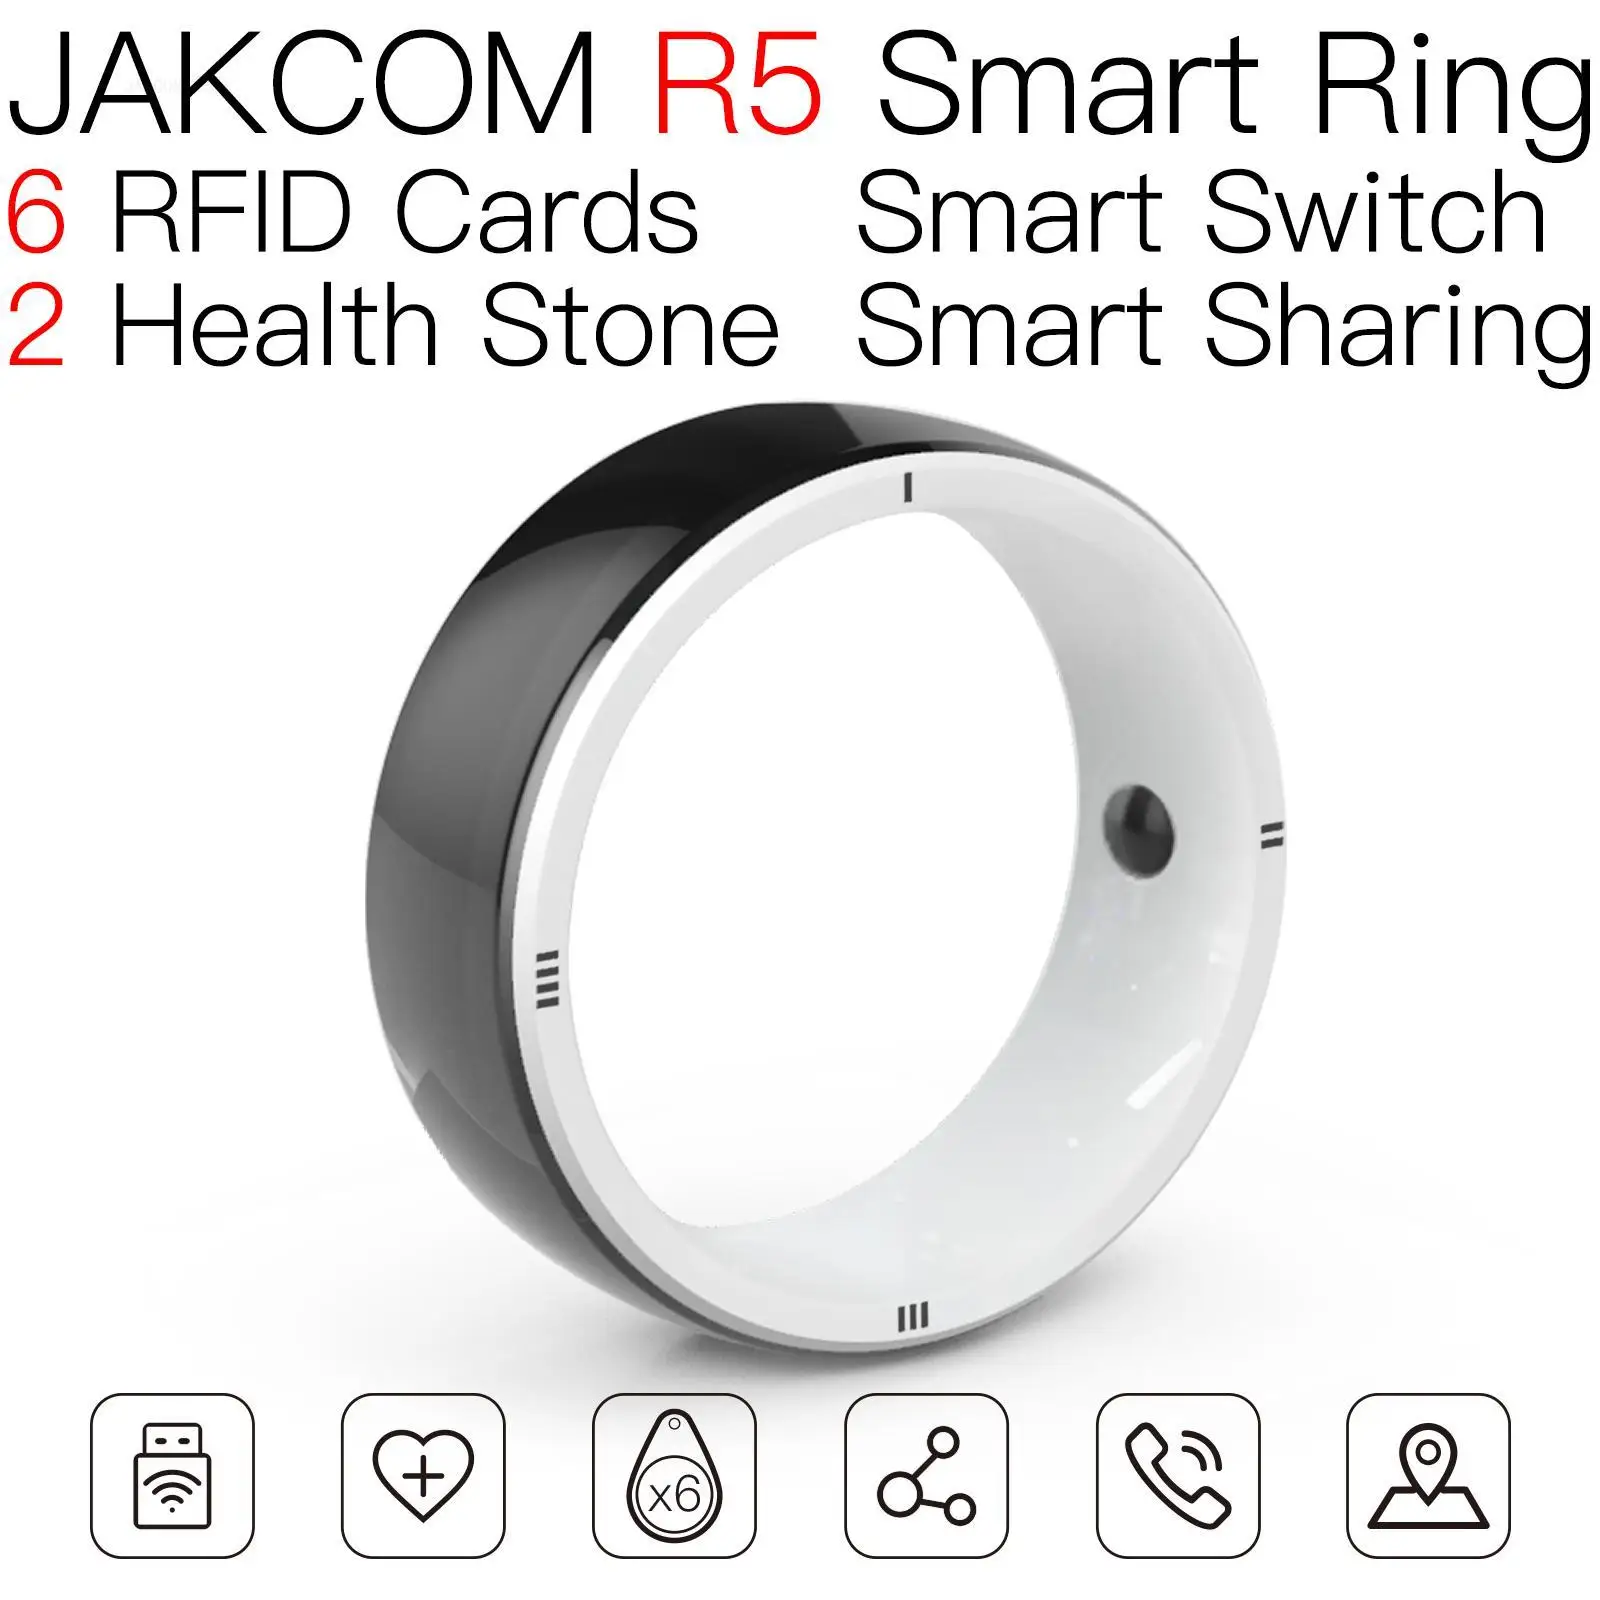 

JAKCOM R5 Smart Ring better than som realme official store oxygen concetrator wearable devices 11 fitness bands watch 7